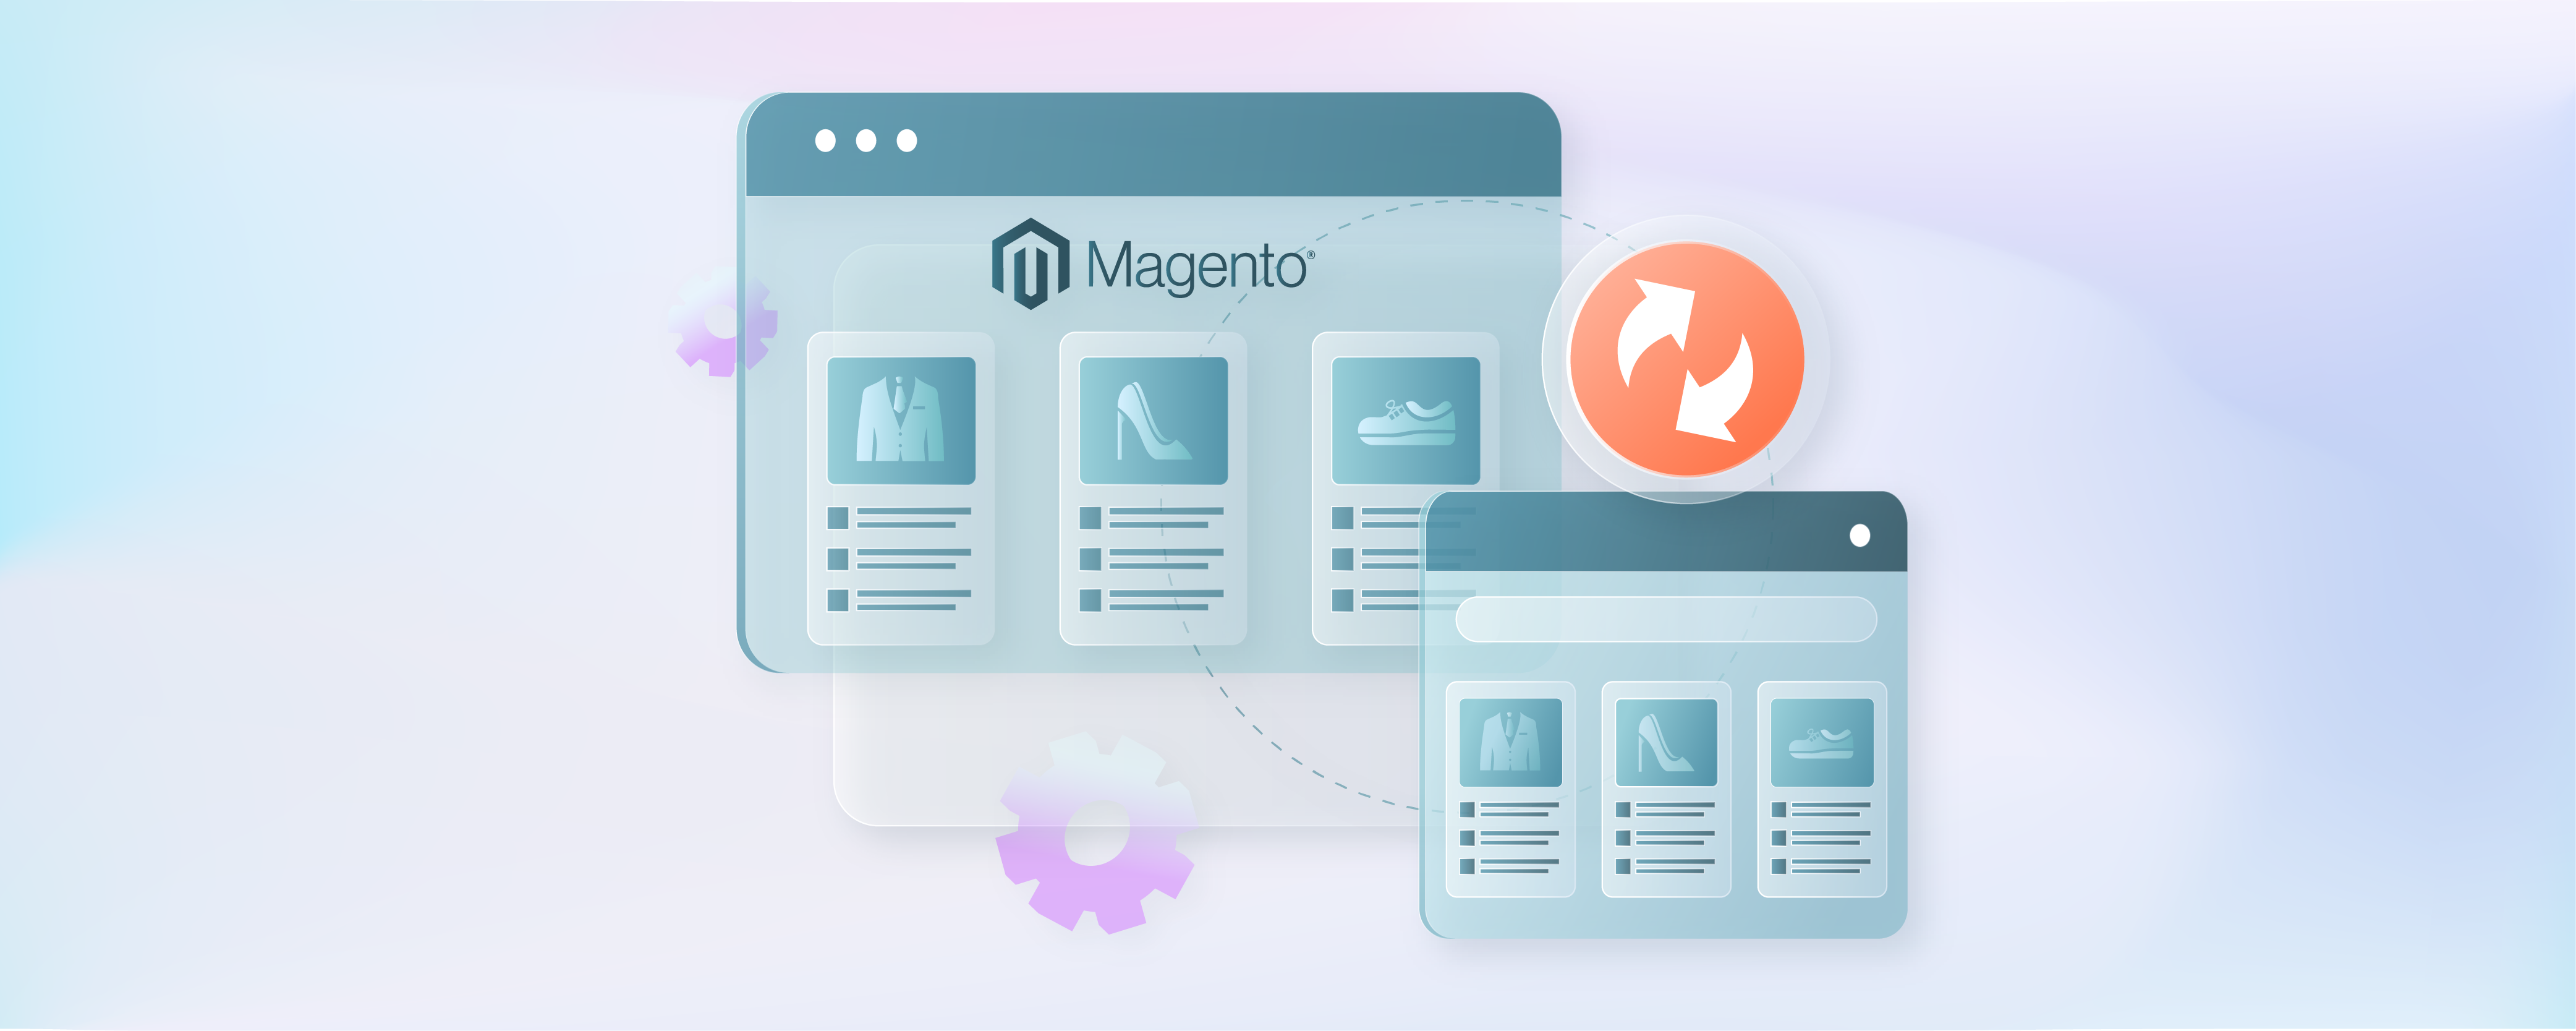 How to Fix Magento Catalog Sync Issues